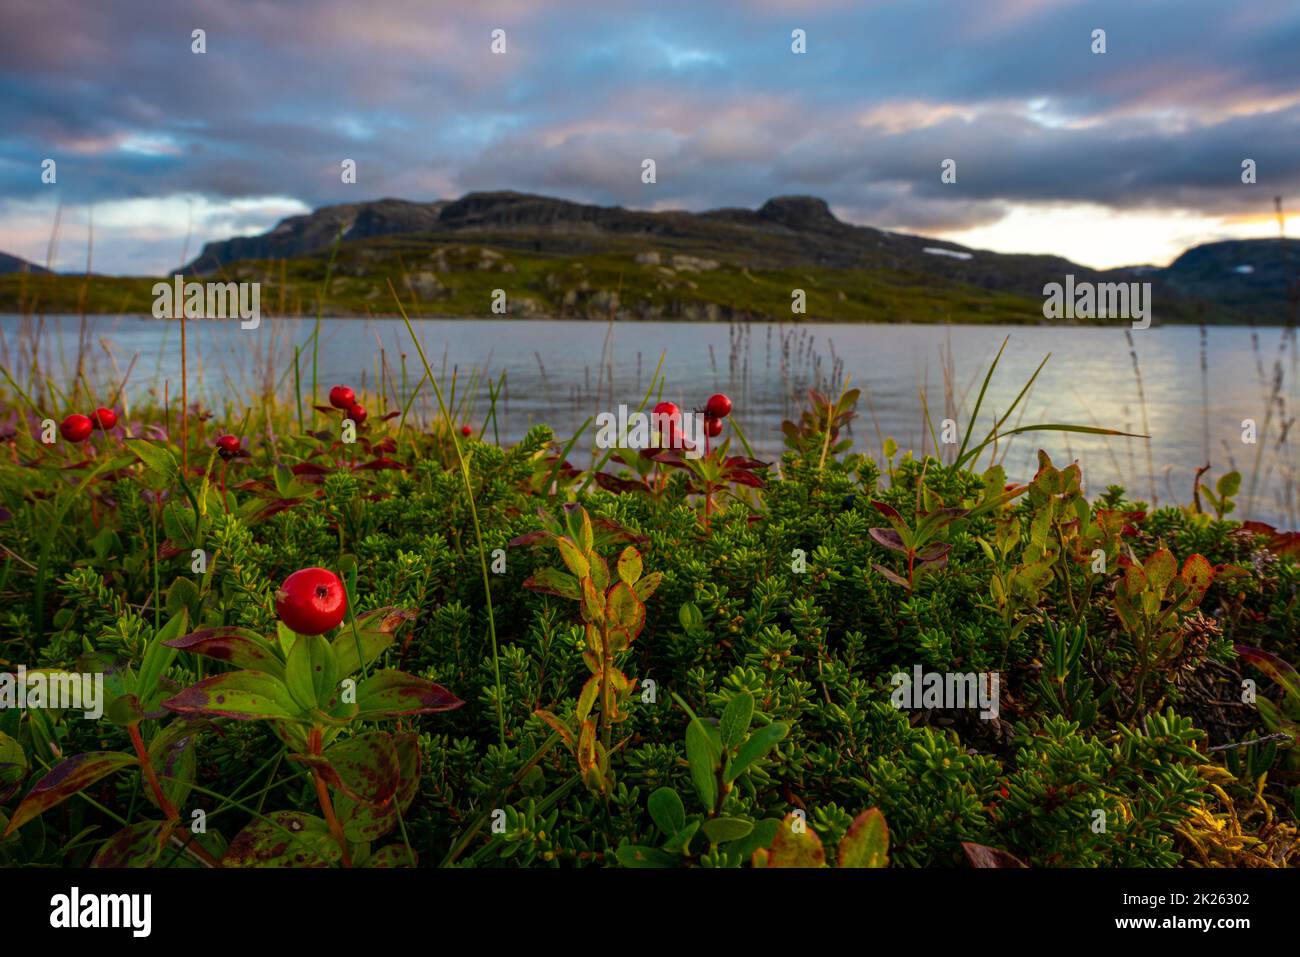 Norway landscape, wild lingonberry and crowberry plants by the stavatn lake Stock Photo